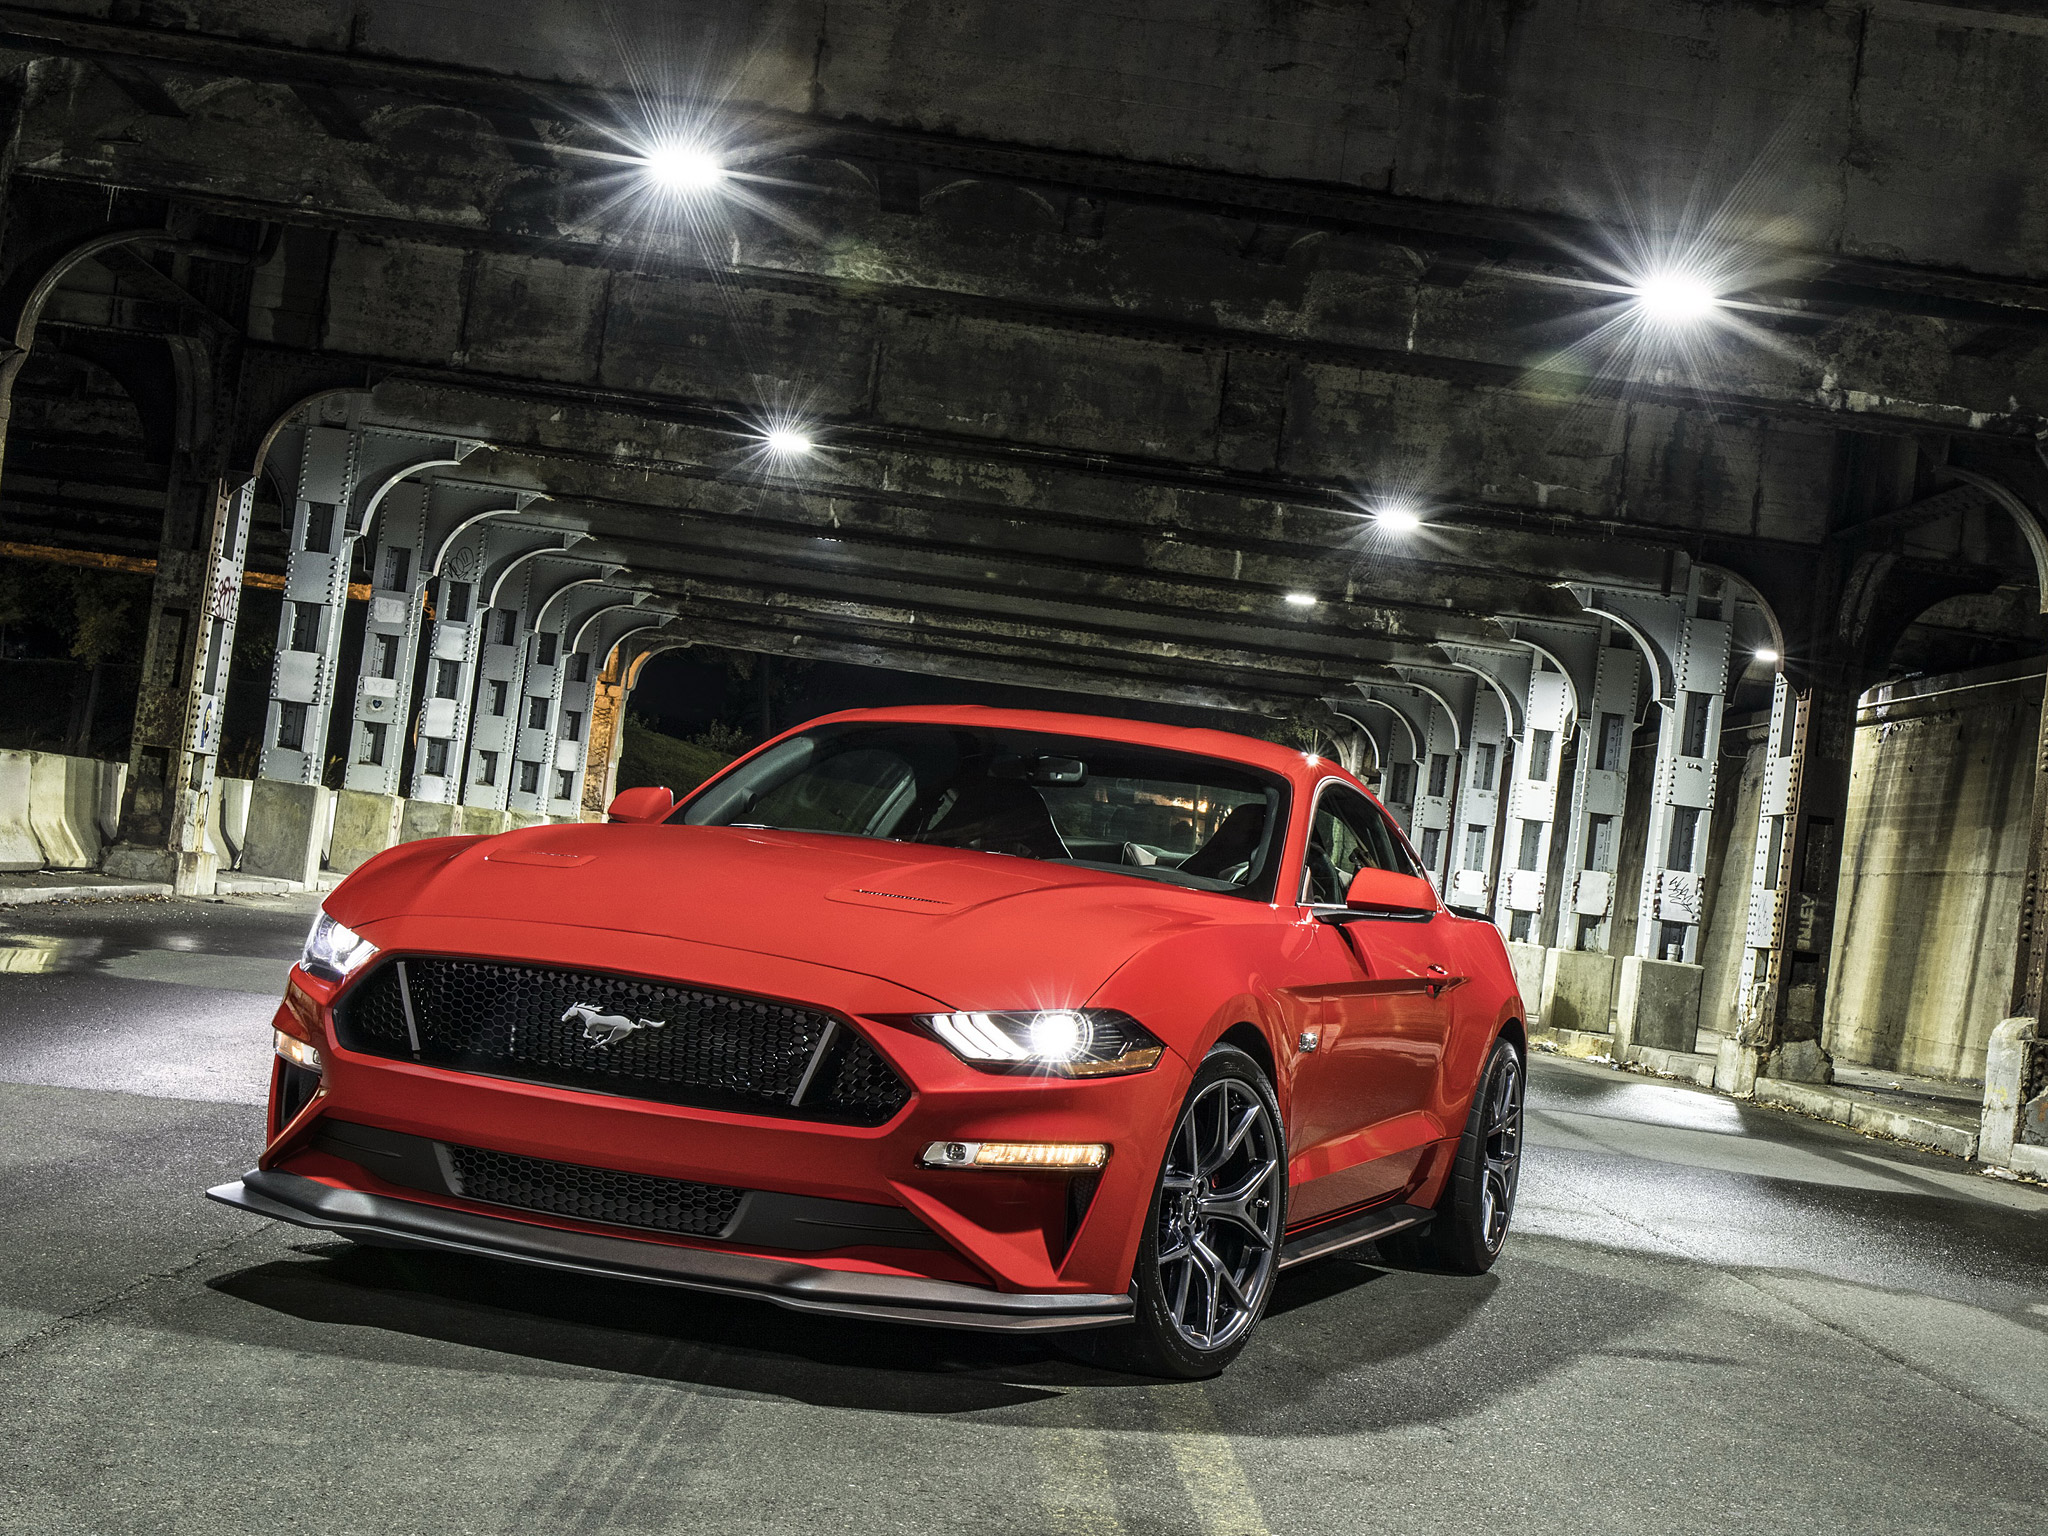  2018 Ford Mustang GT Performance Pack Level 2 Wallpaper.